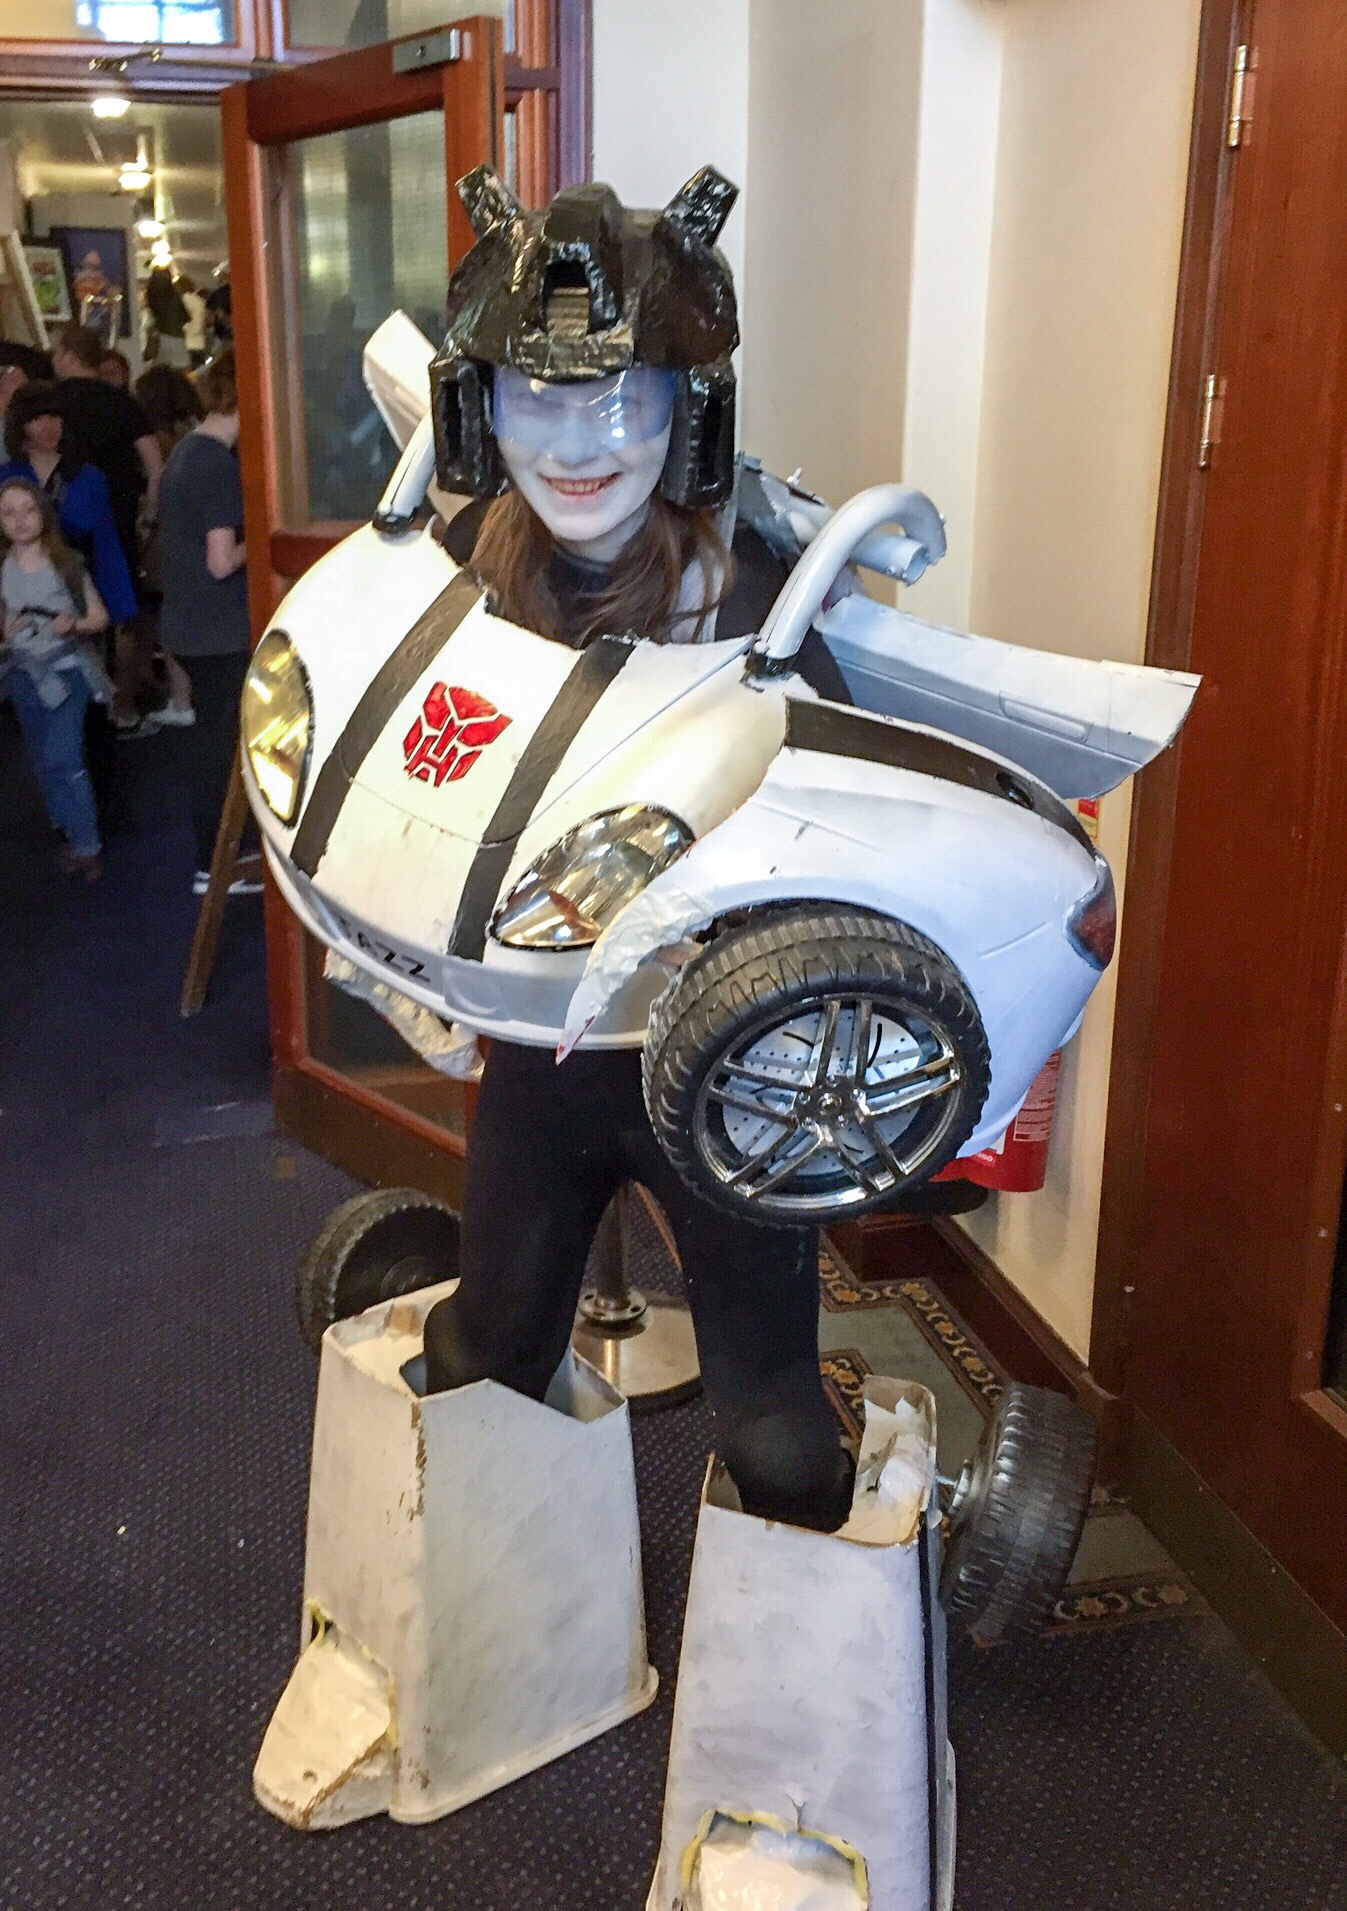 Cosplayer Sarah Gale Got my vote as most ambitious cosplayer of the day for her Transformers-inspired costume